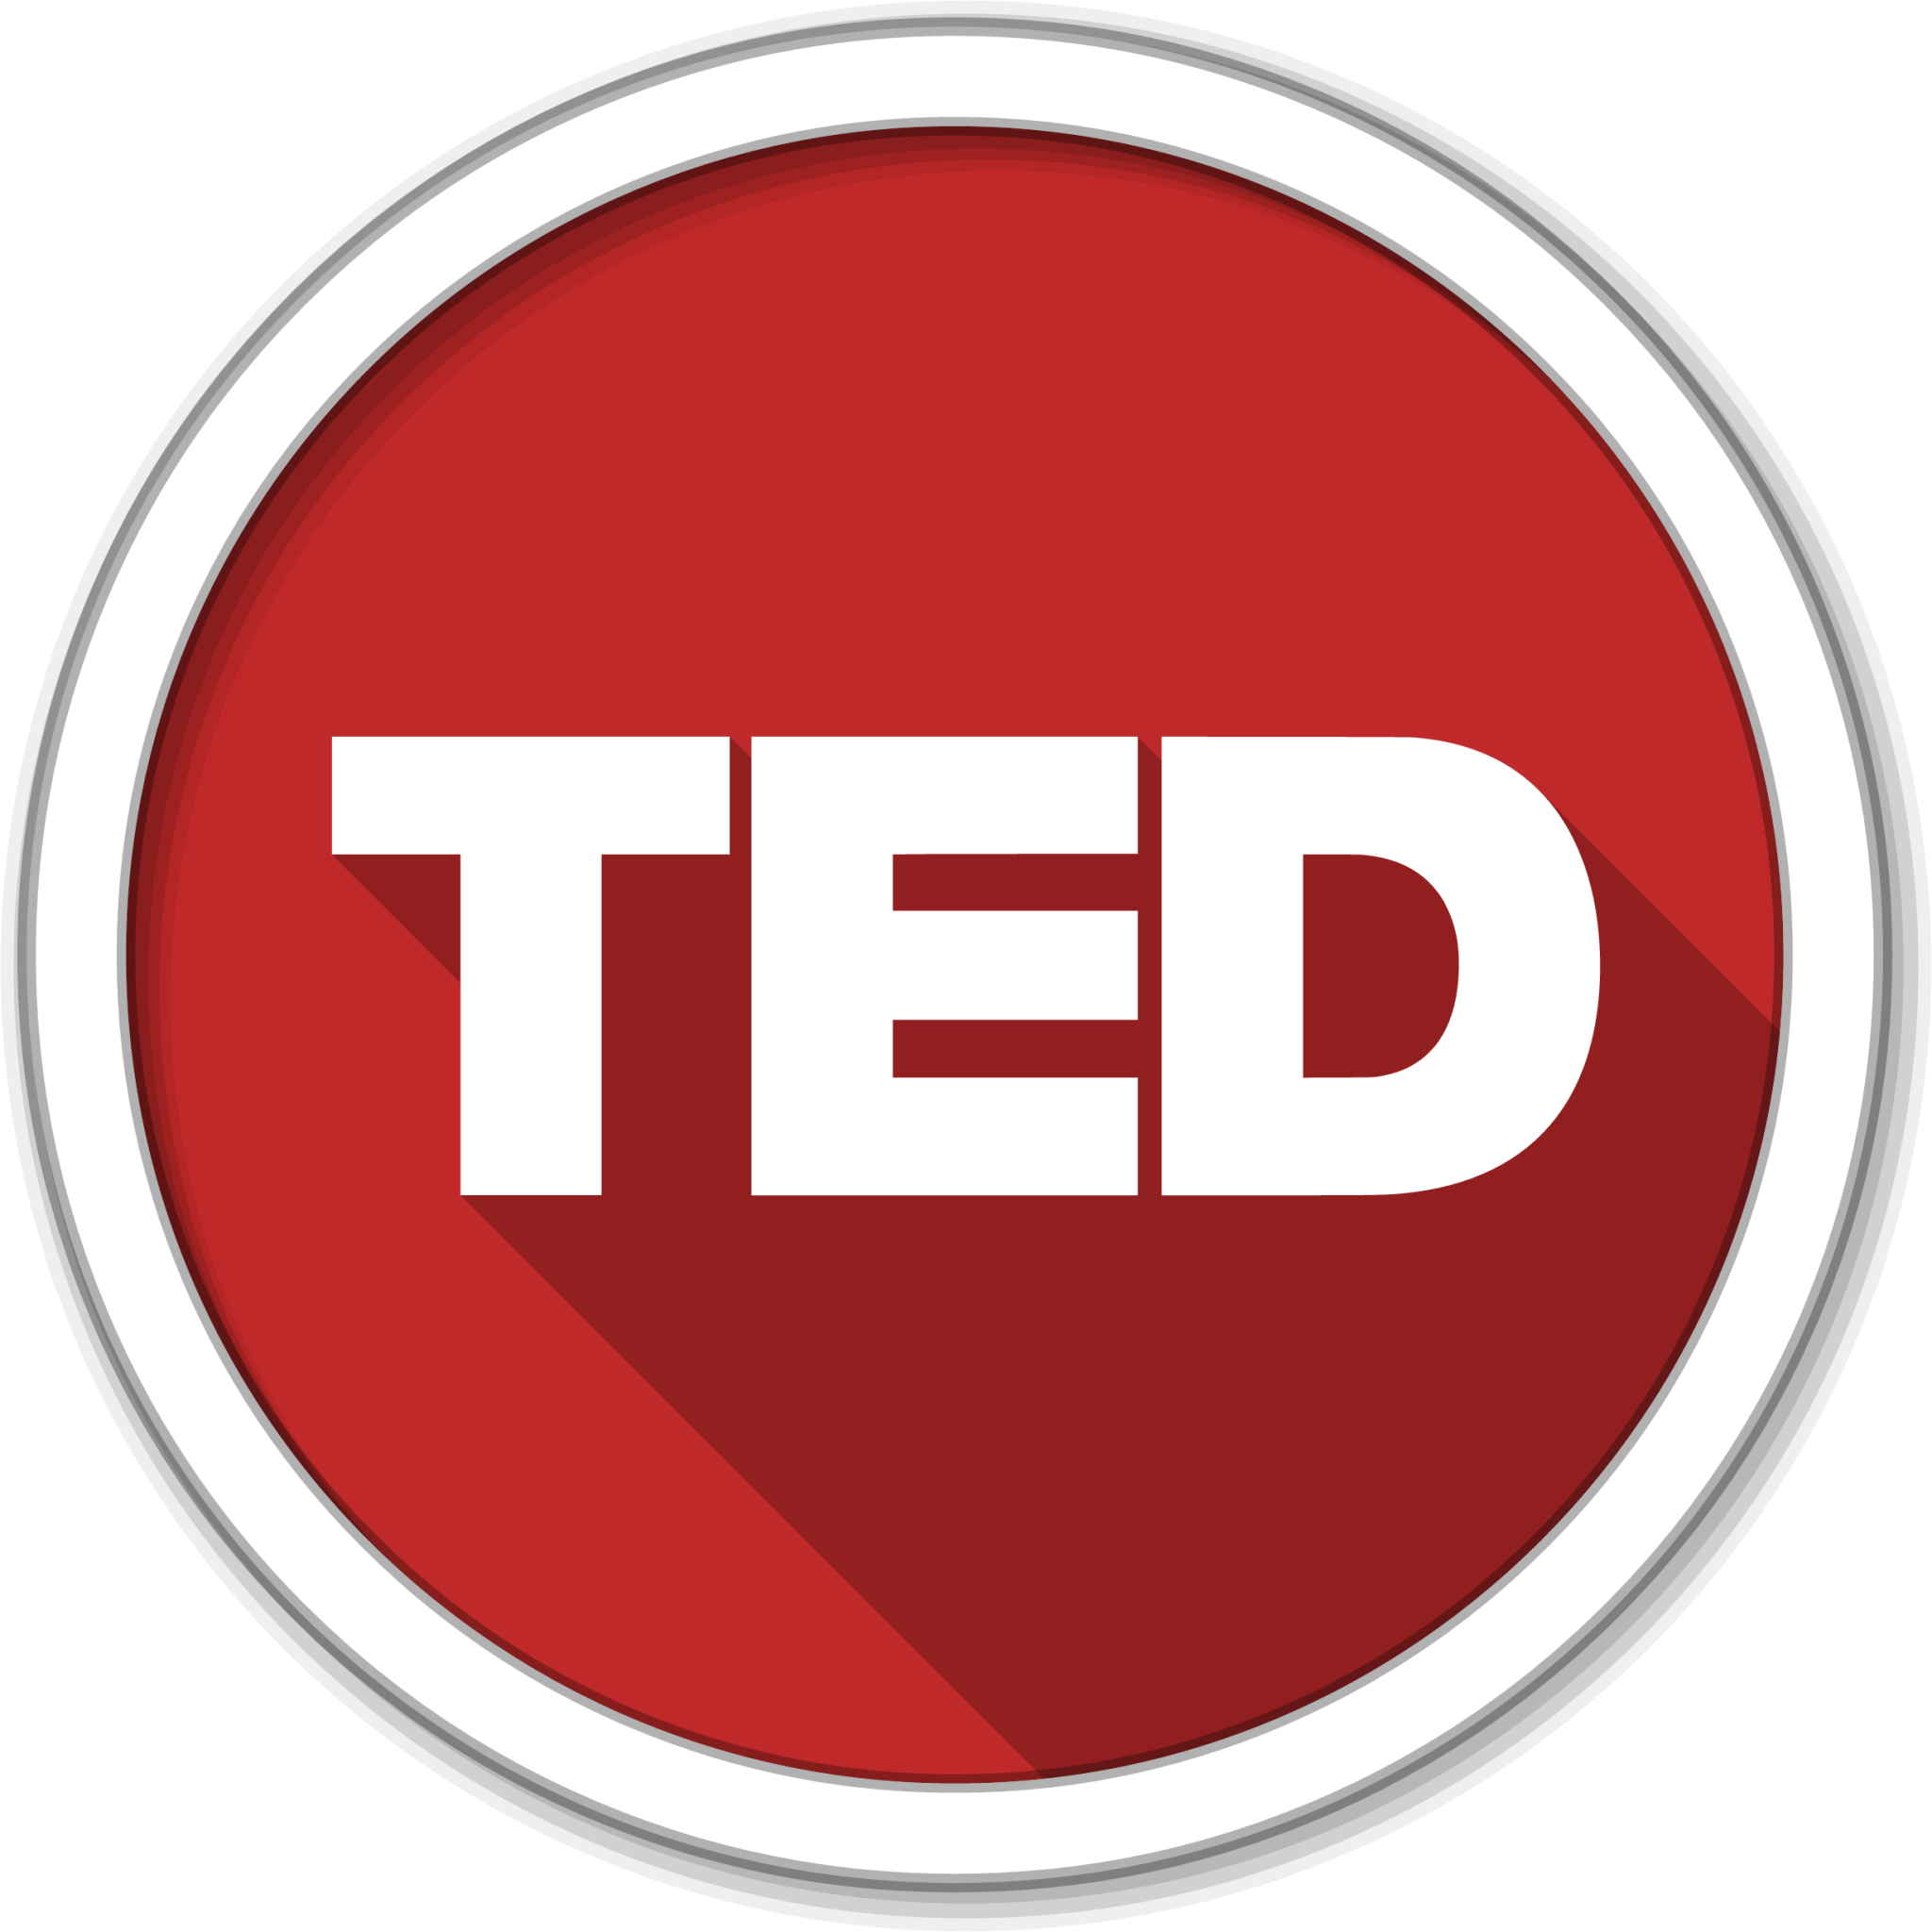 ted icon